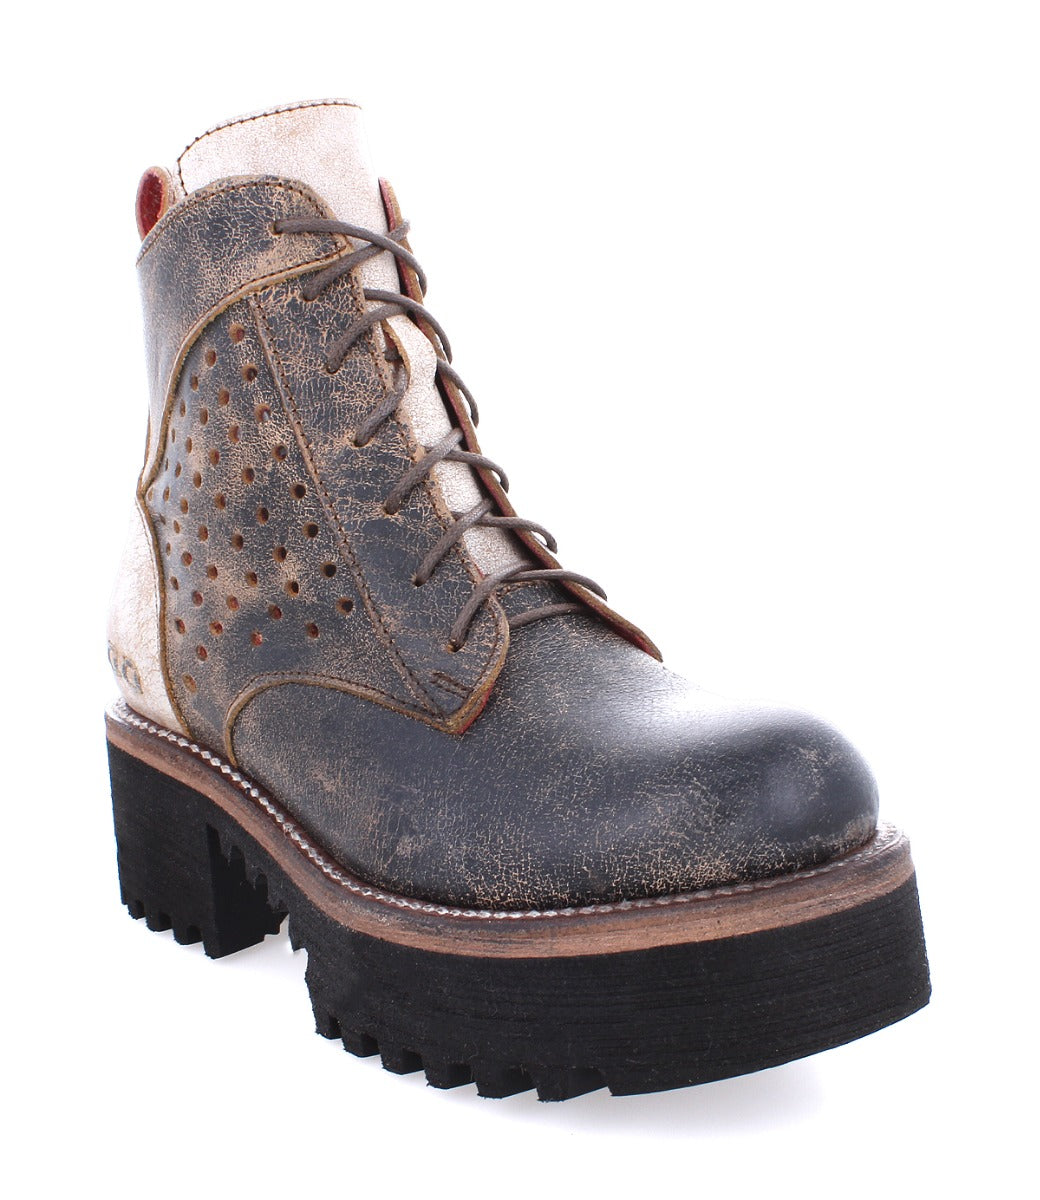 A Bed Stu Tanzania women's boot with a brown leather upper and a black outsole.